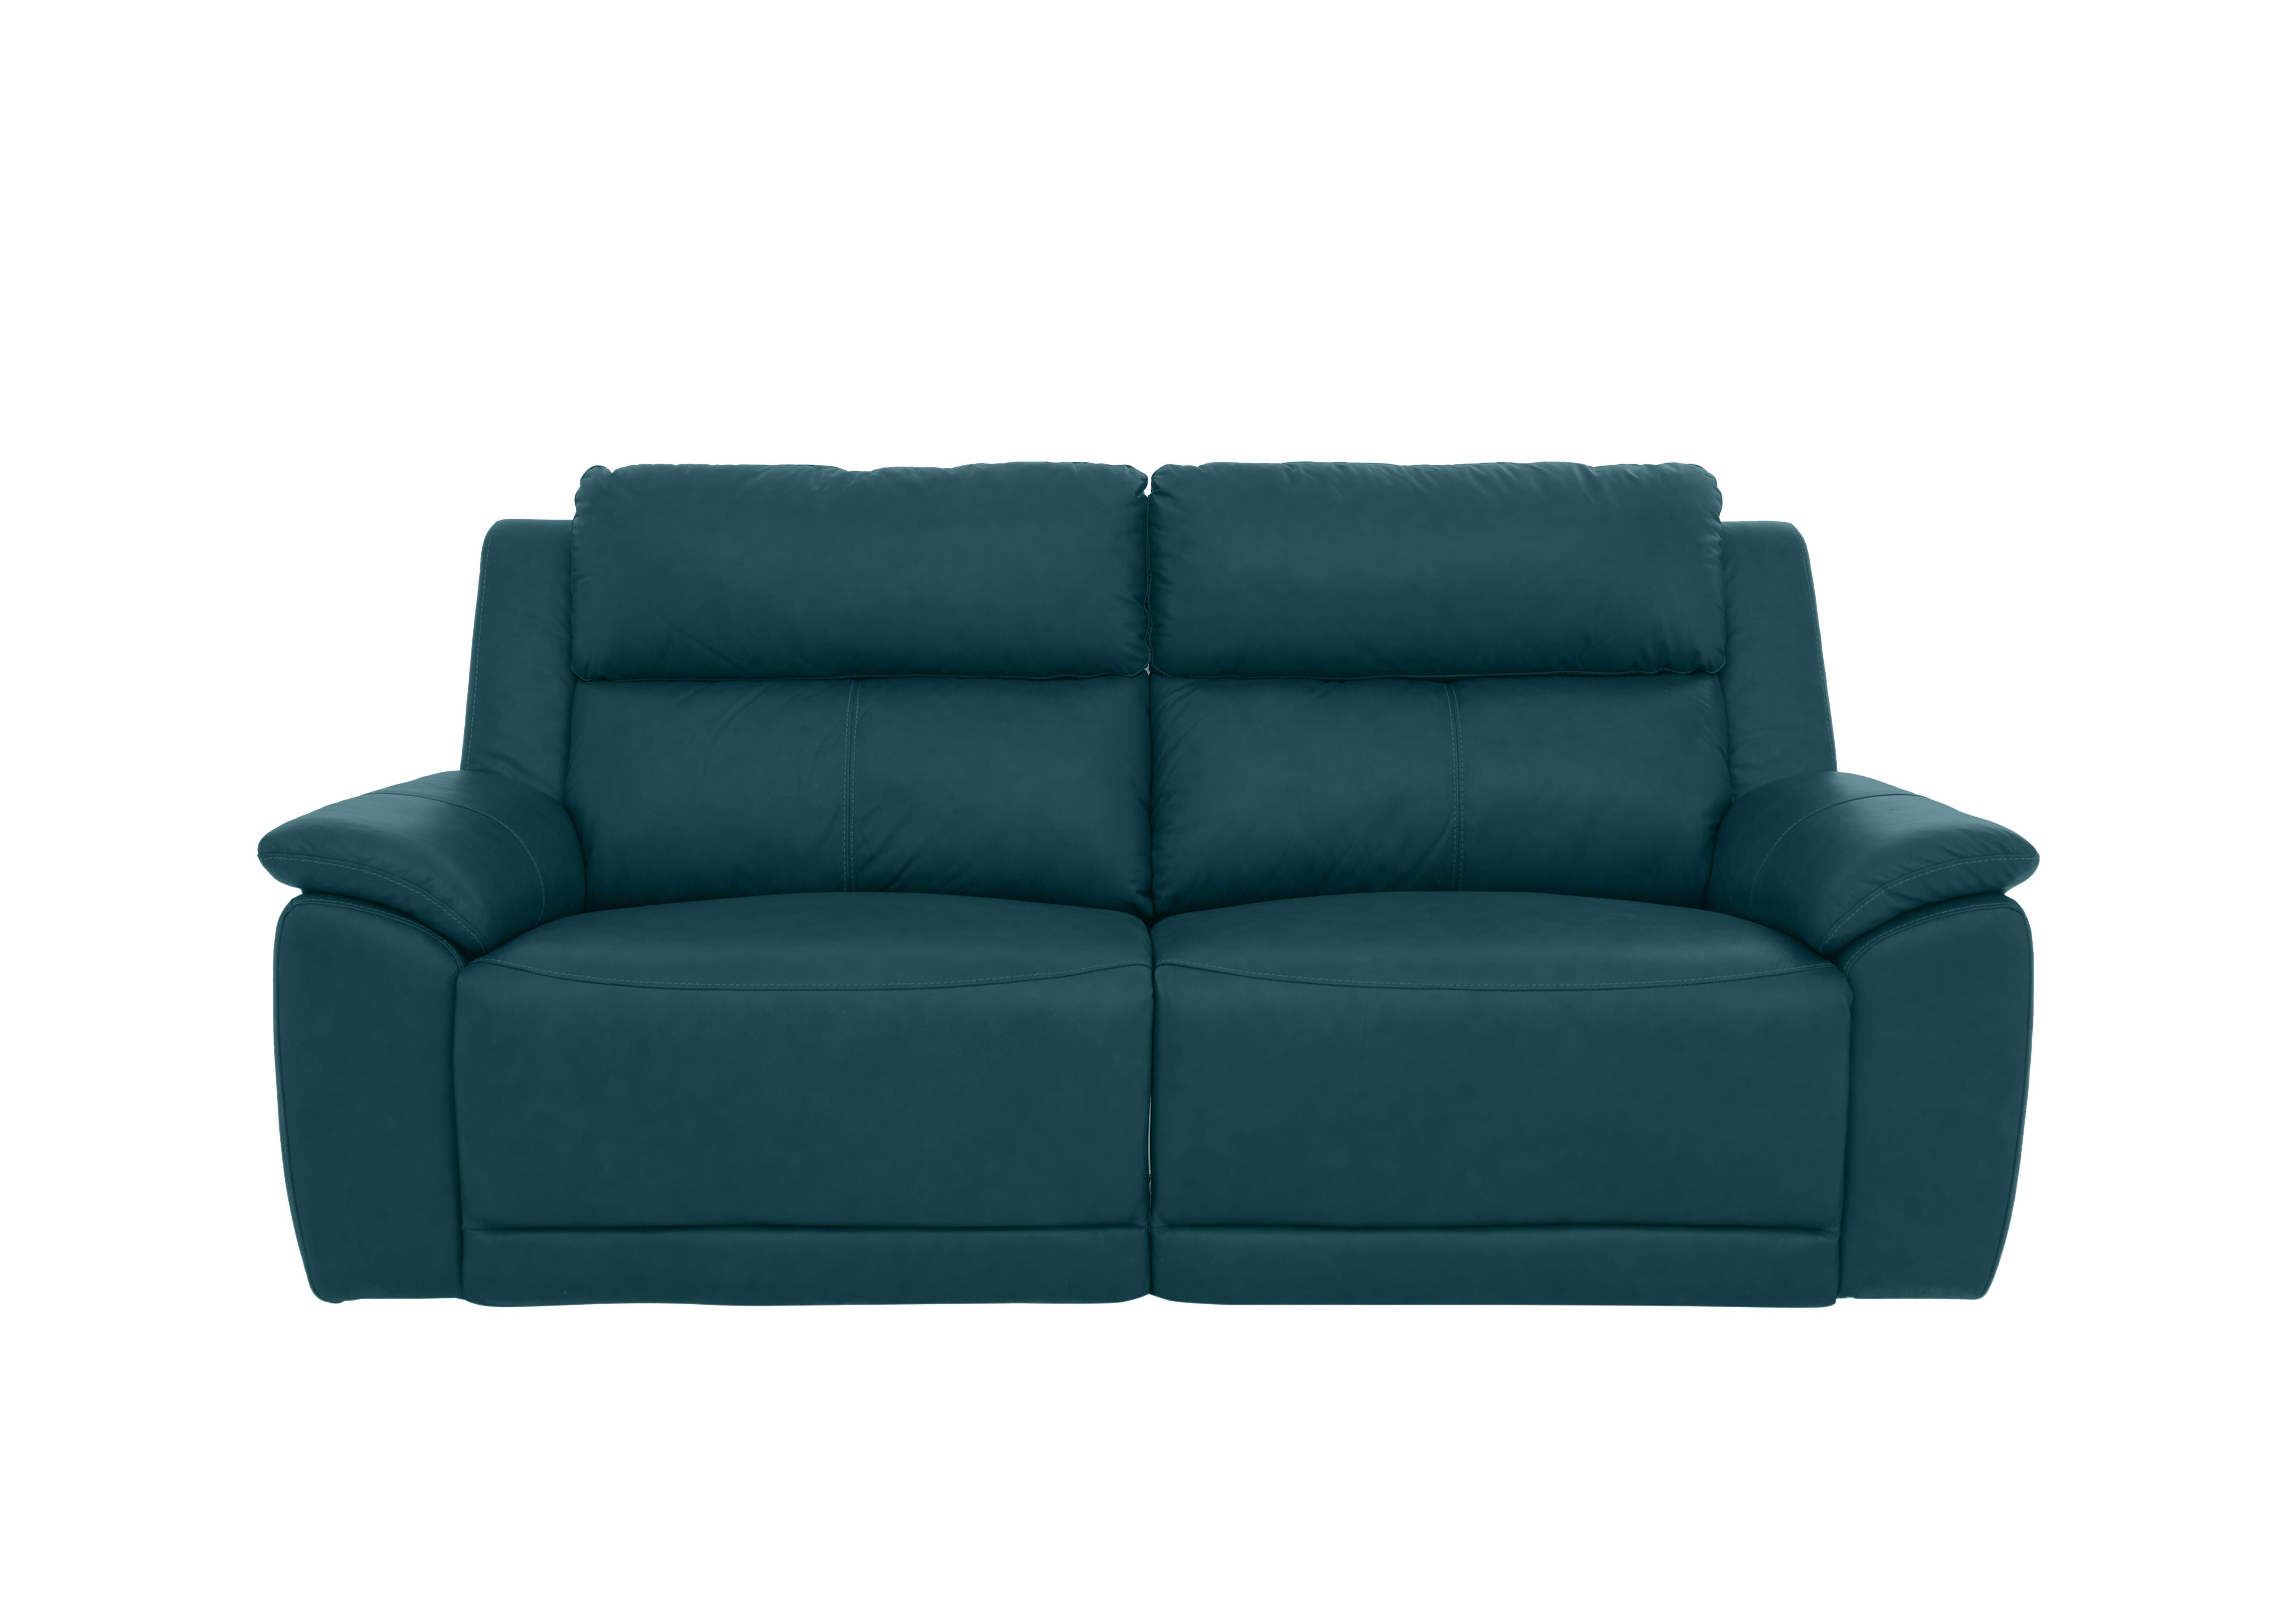 Utah 3 Seater Leather Power Recliner Sofa with Power Headrests and Power Lumbar in Midnight Jade Le-9314 on Furniture Village